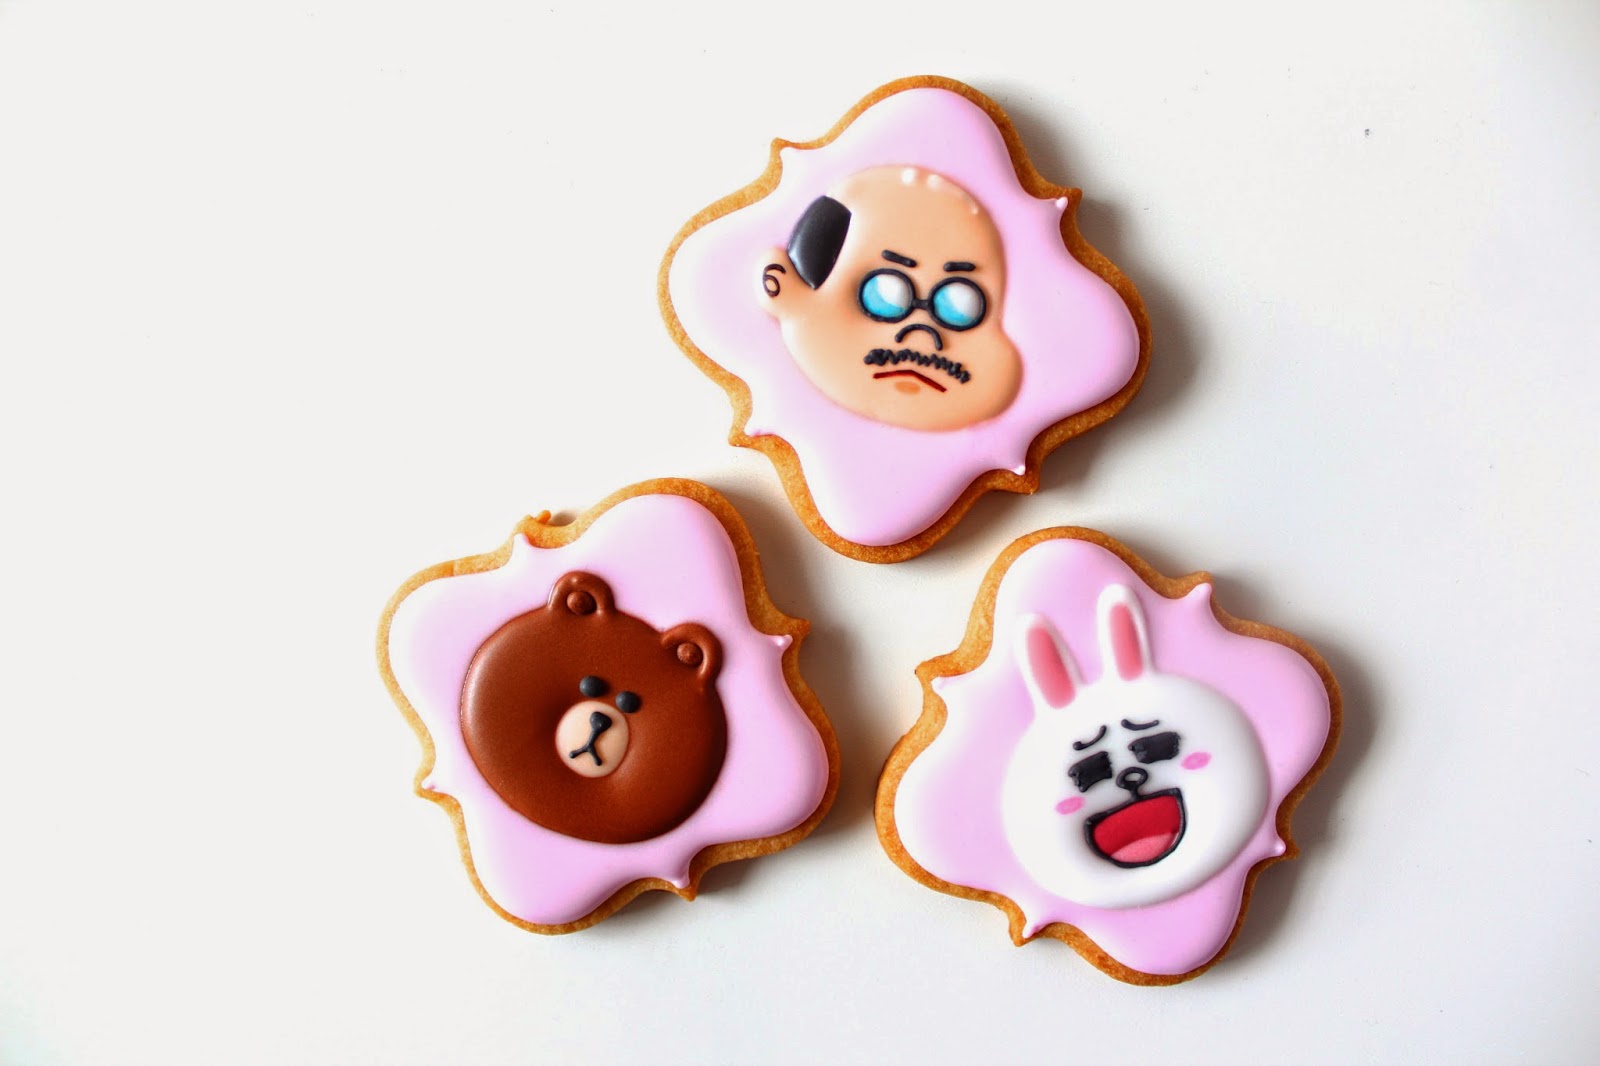 Sweeten Your Day ラインキャラクターのアイシングクッキー Line Character Icing Cookies